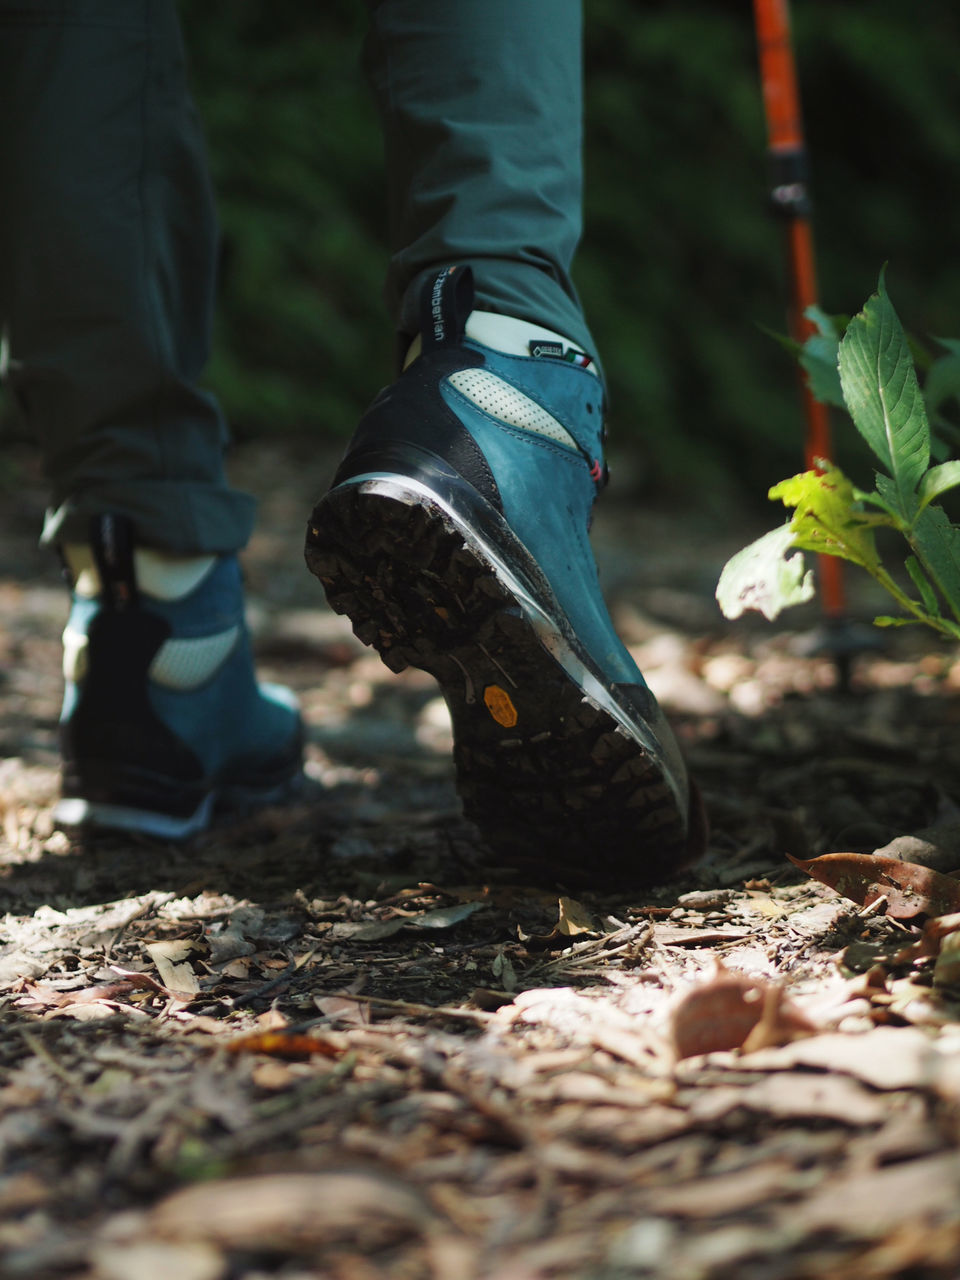 low section, human leg, human body part, body part, real people, day, nature, one person, selective focus, land, shoe, men, outdoors, lifestyles, plant, field, standing, boot, leaf, human foot, human limb, farmer, jeans, gardening, leaves